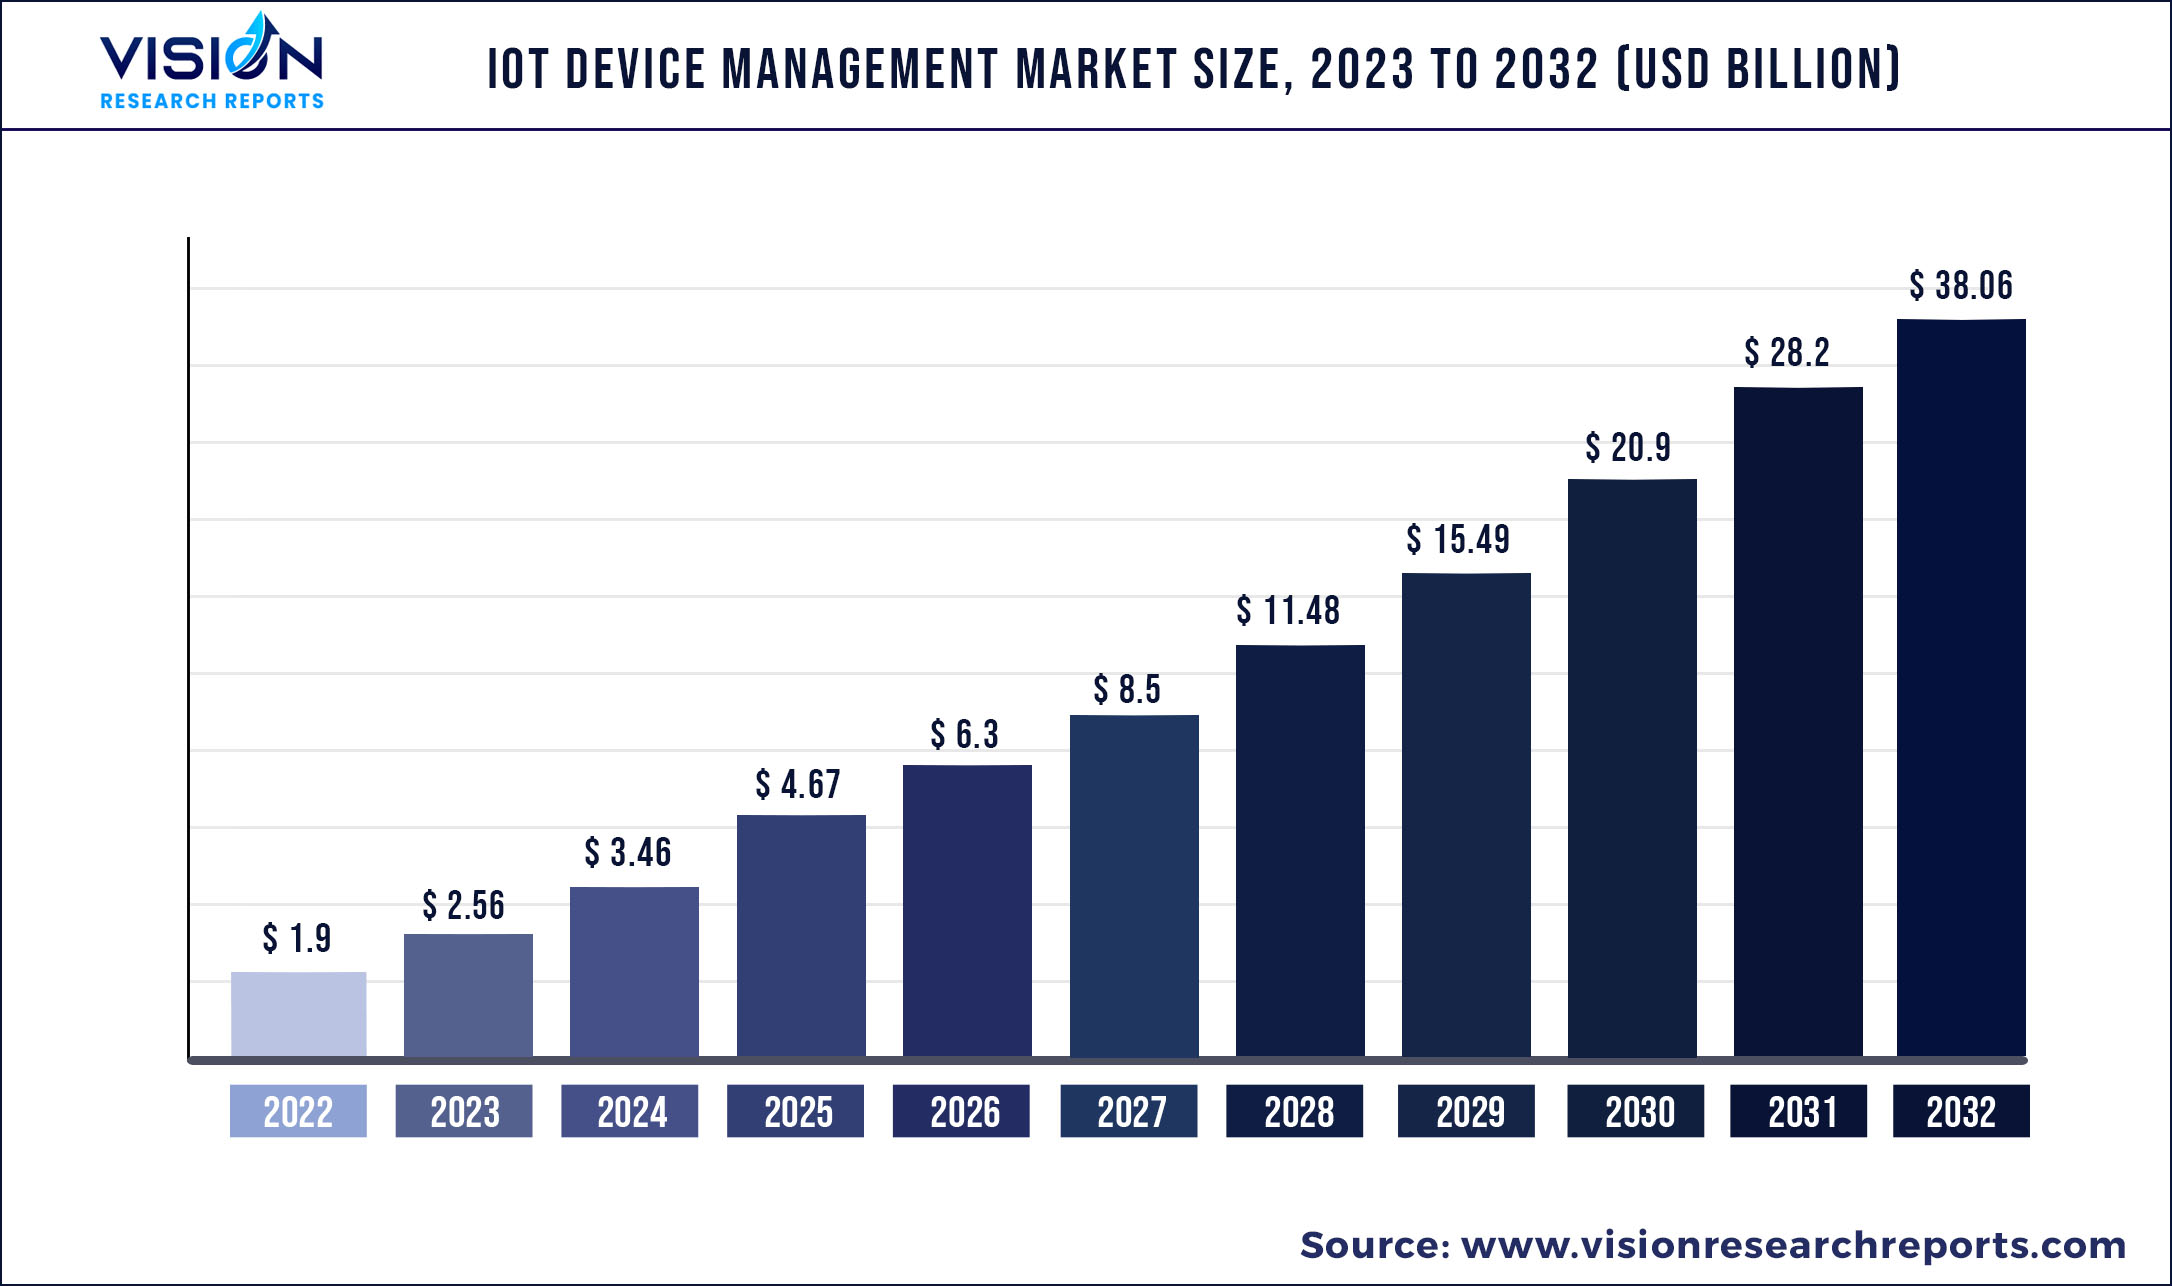 IoT Device Management Market Size 2023 to 2032